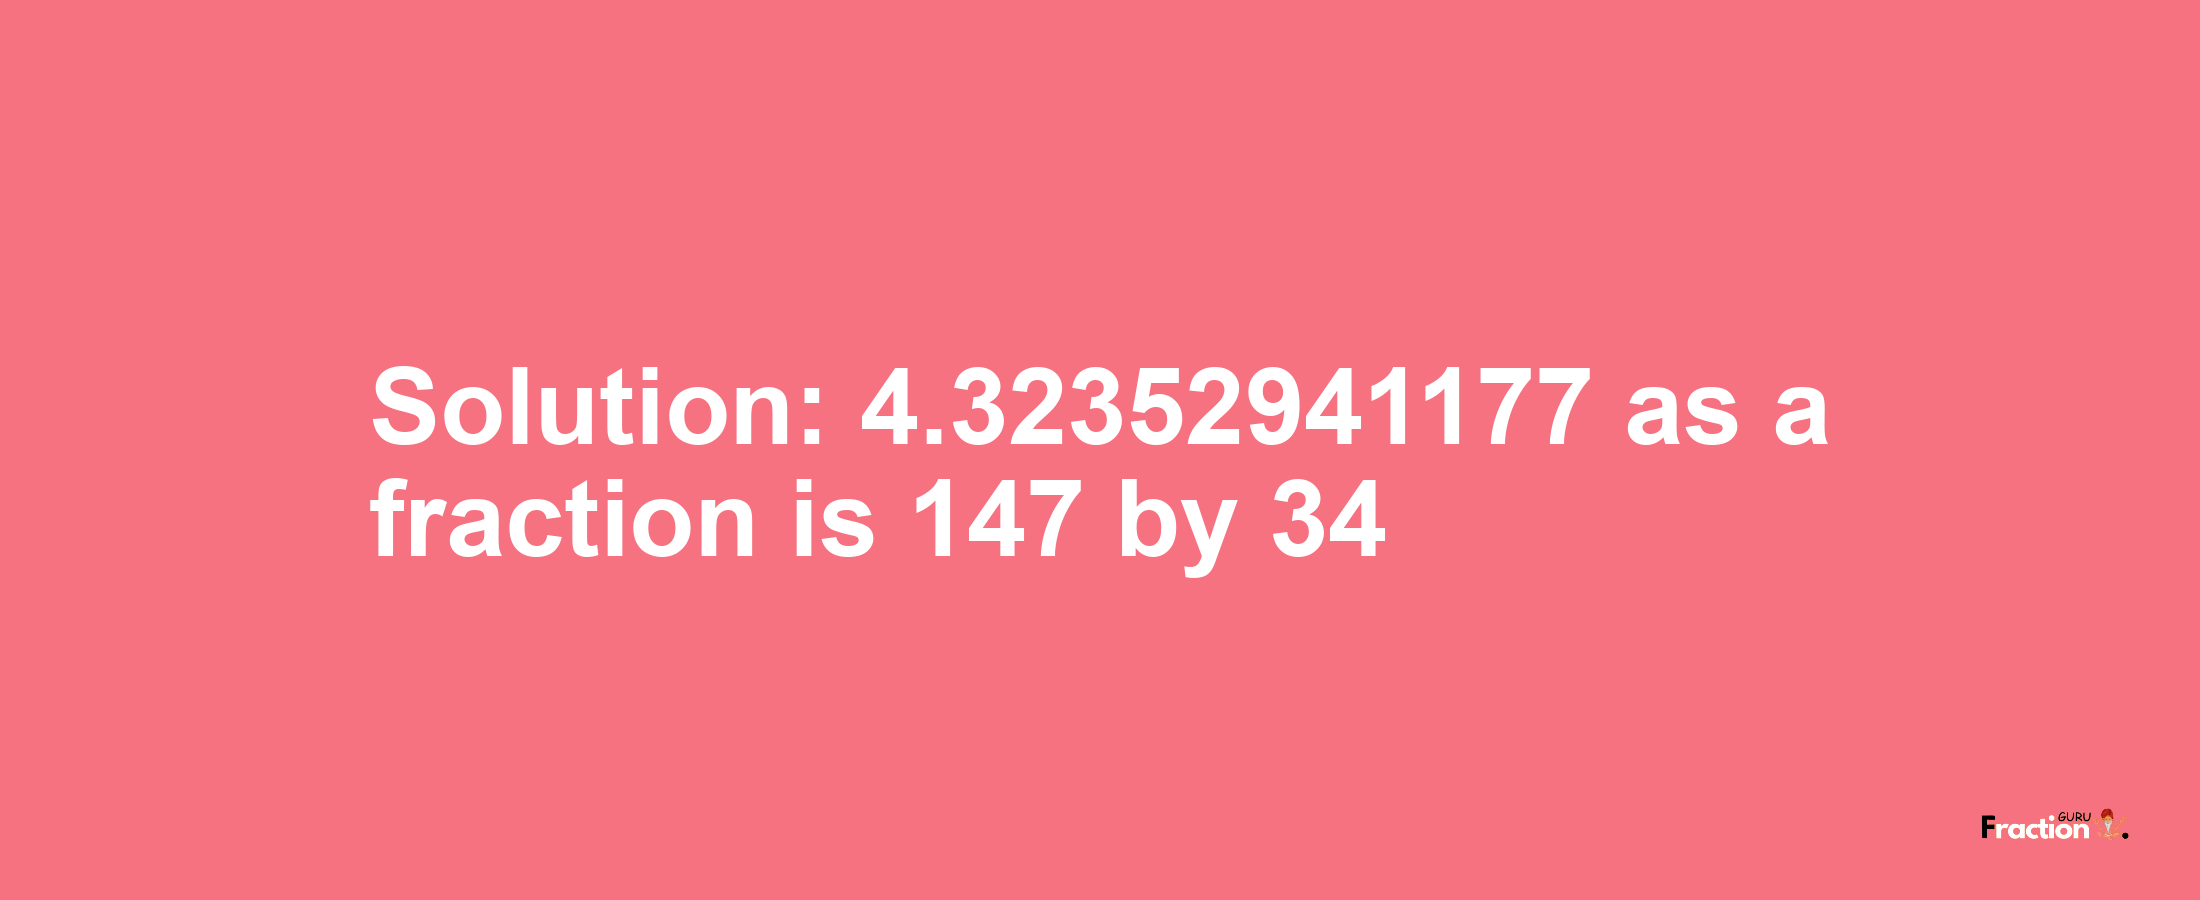 Solution:4.32352941177 as a fraction is 147/34